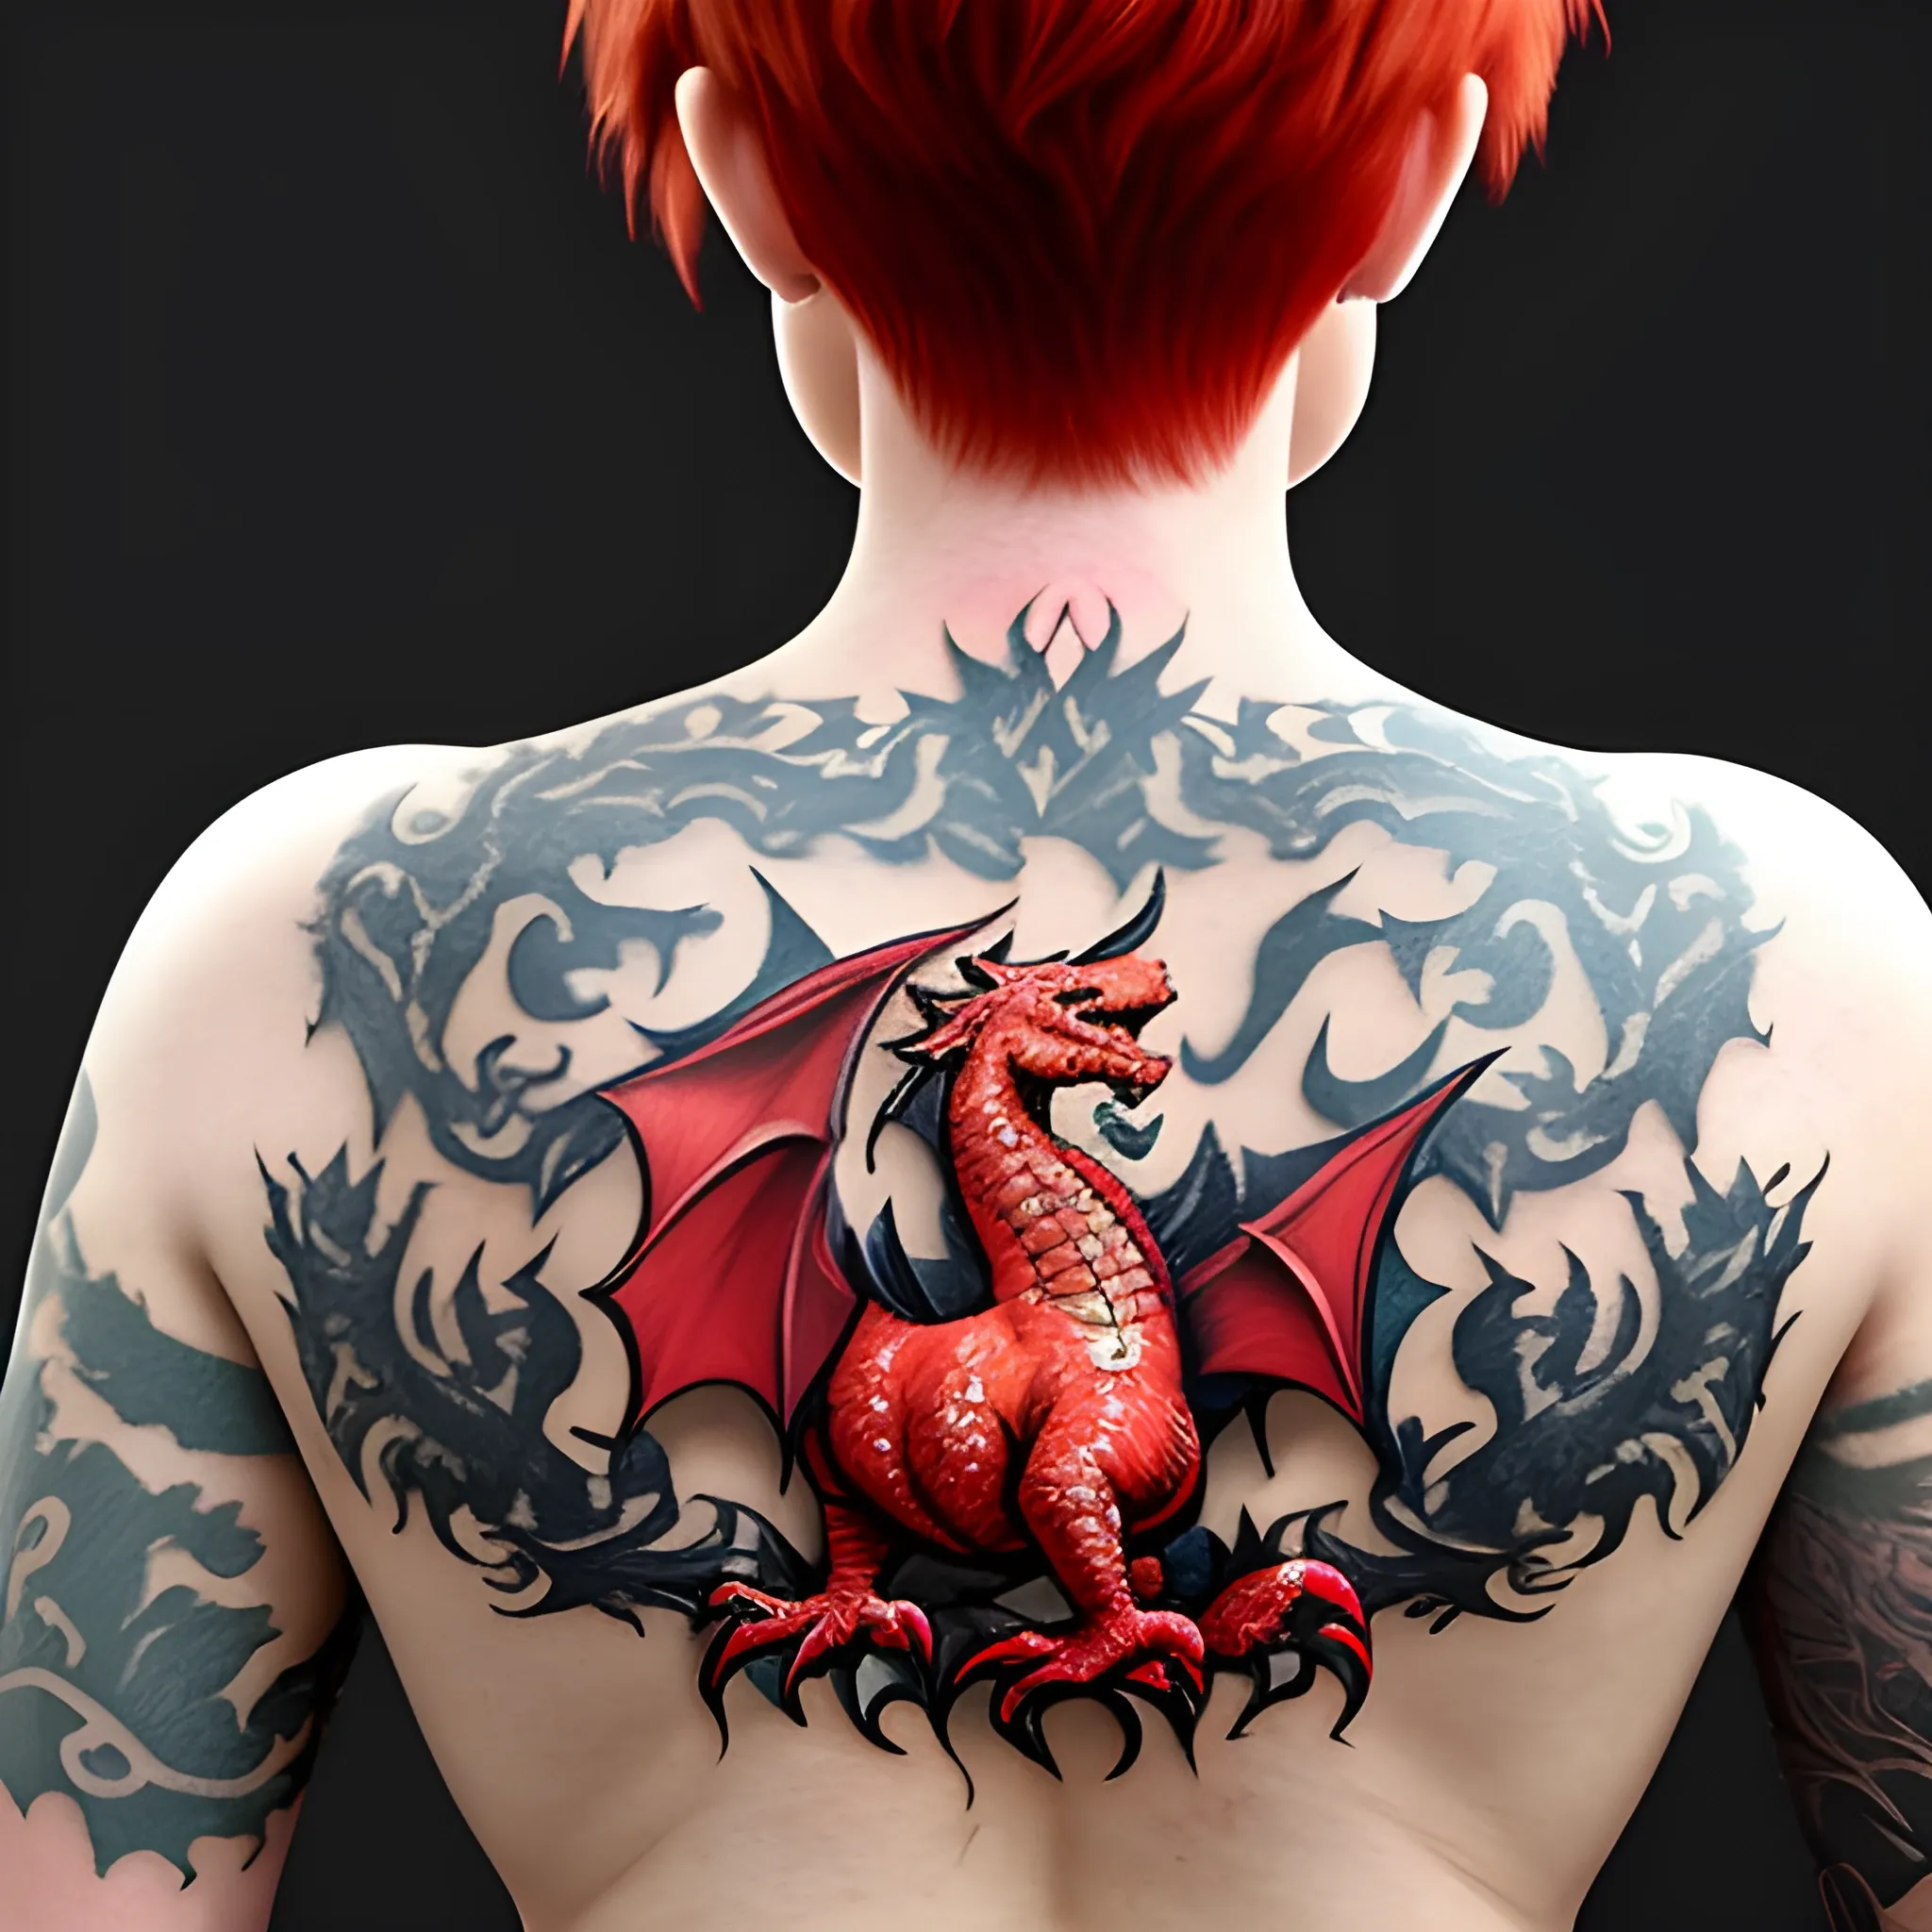 Dragon tattoo on the chest.